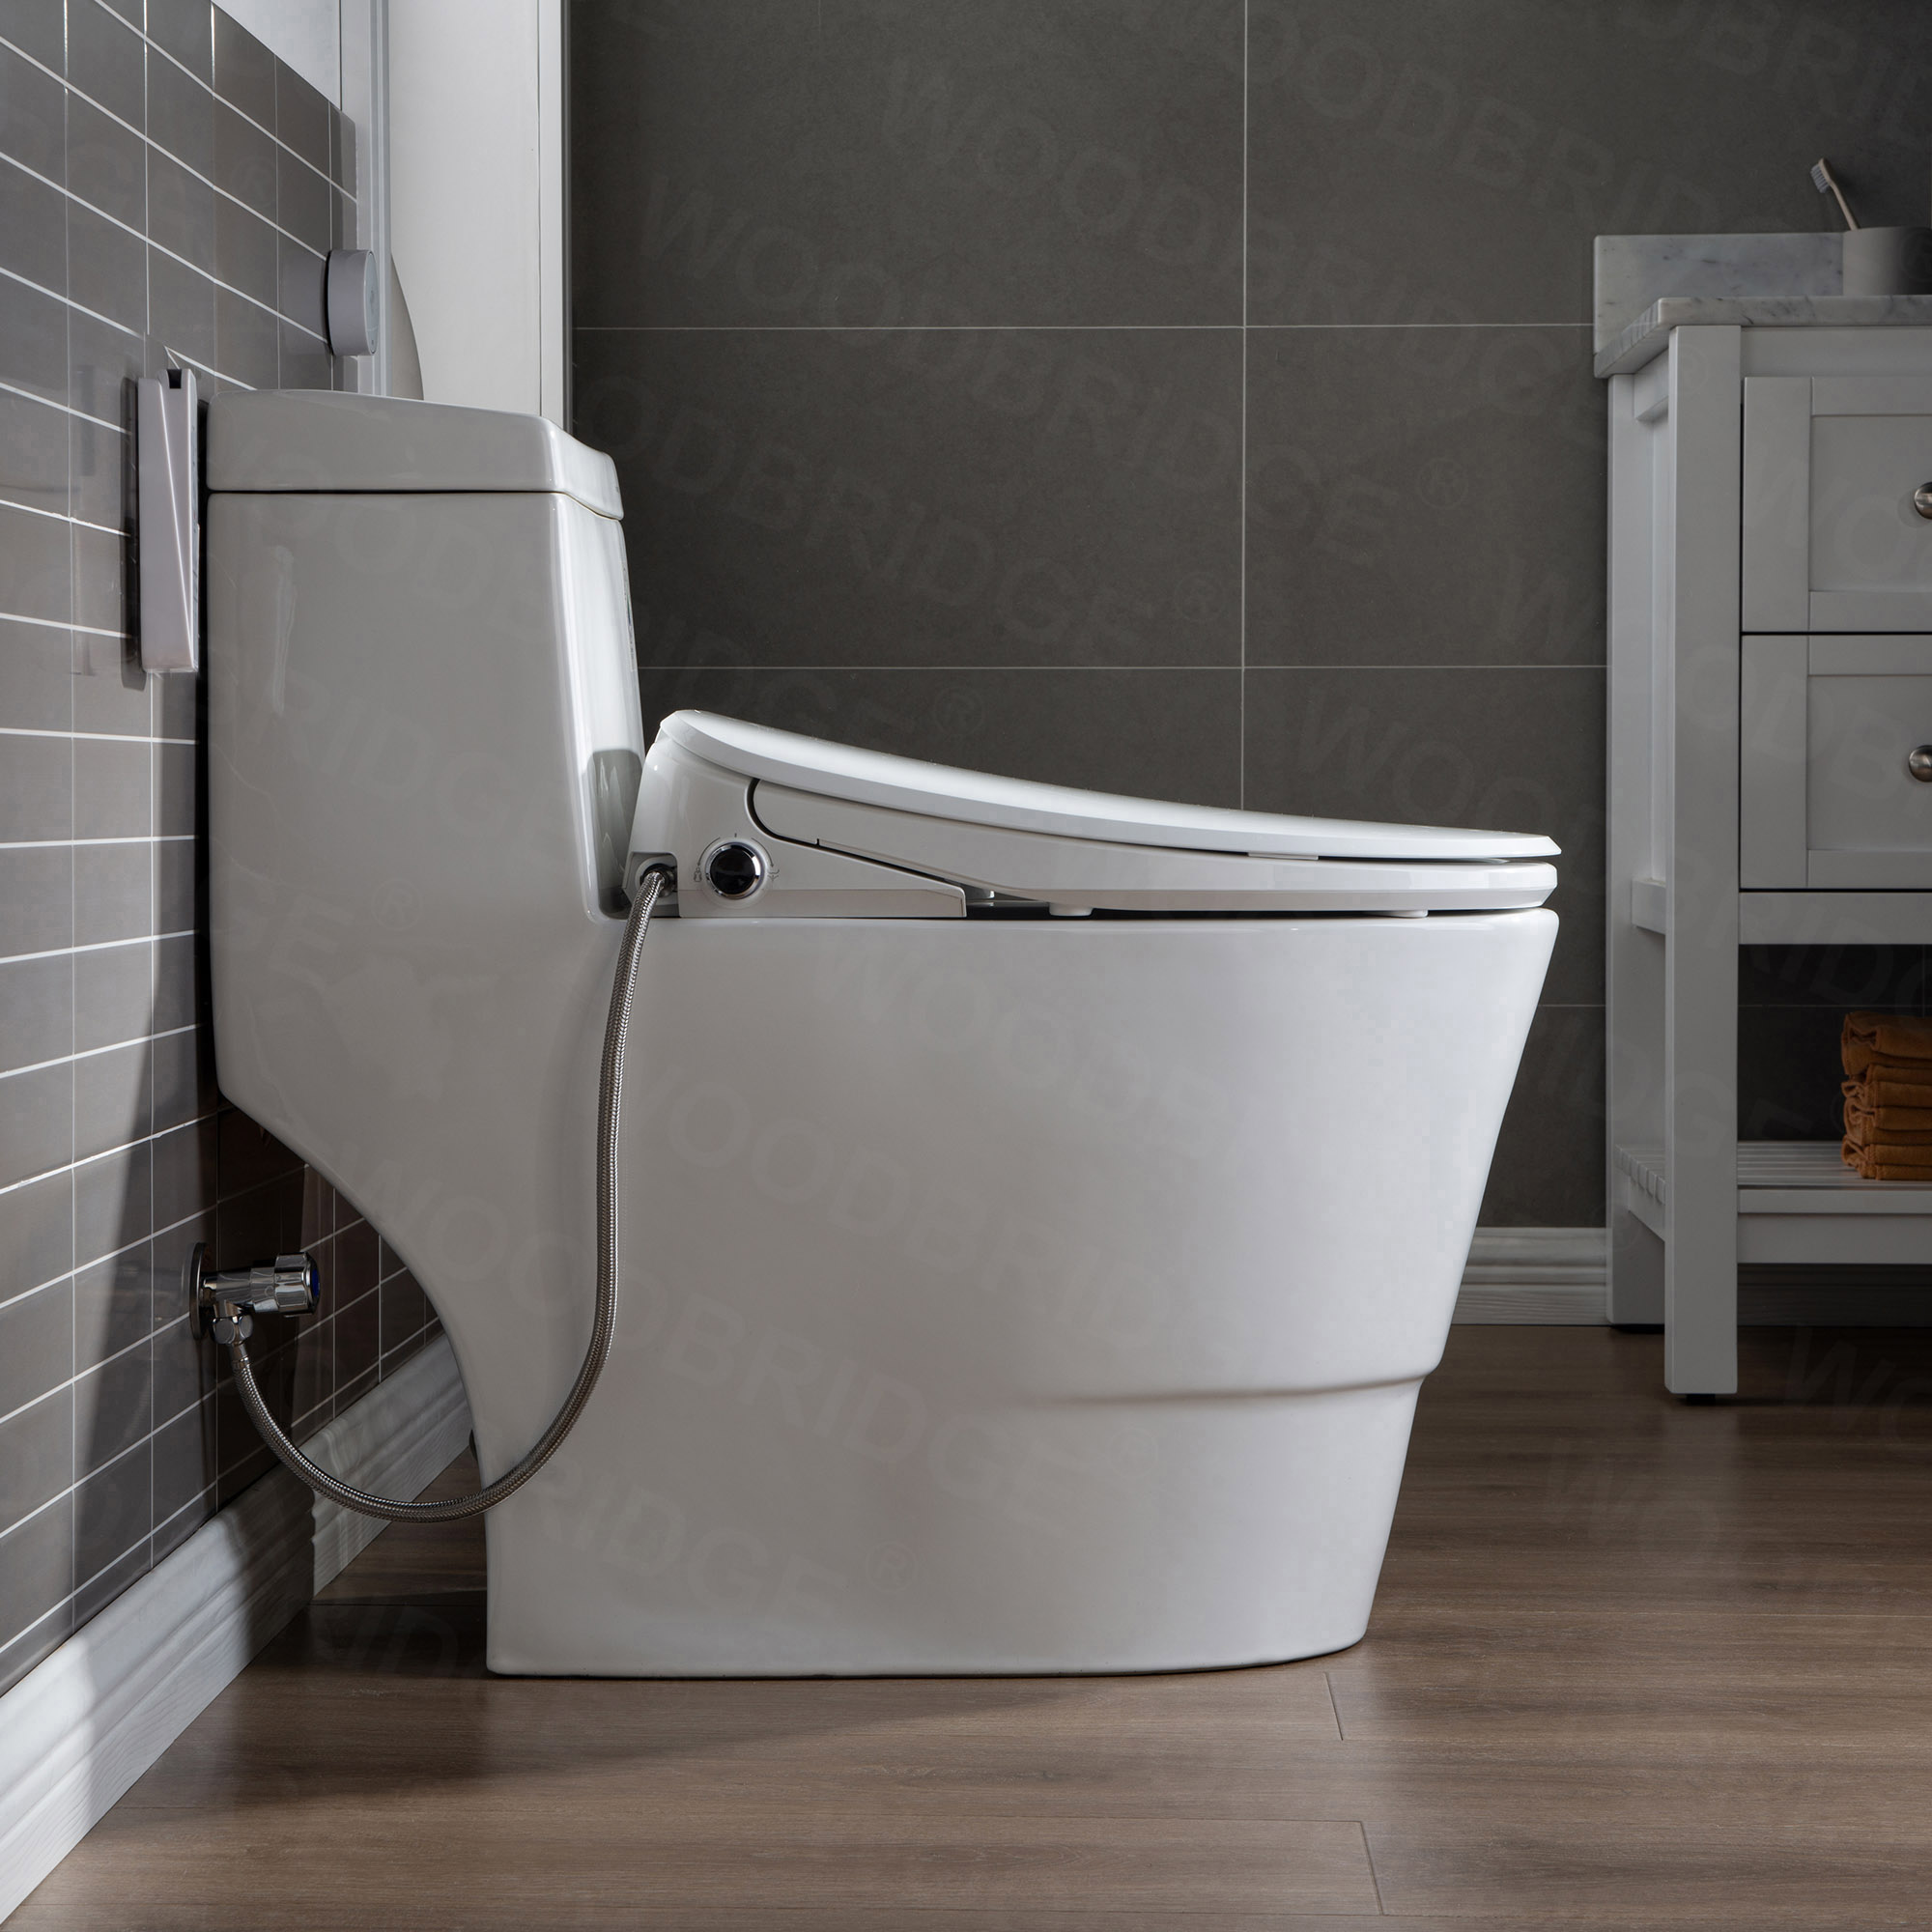  WOODBRIDGE T-0041 Elongated one Piece toilet with Smart Bidet Seat, Electronic Advanced Self Cleaning, Soft Close Lid, Adjustable Water Temperature, LED Nightlight, Heated Seat, Warm air Dryer. WHITE_6590